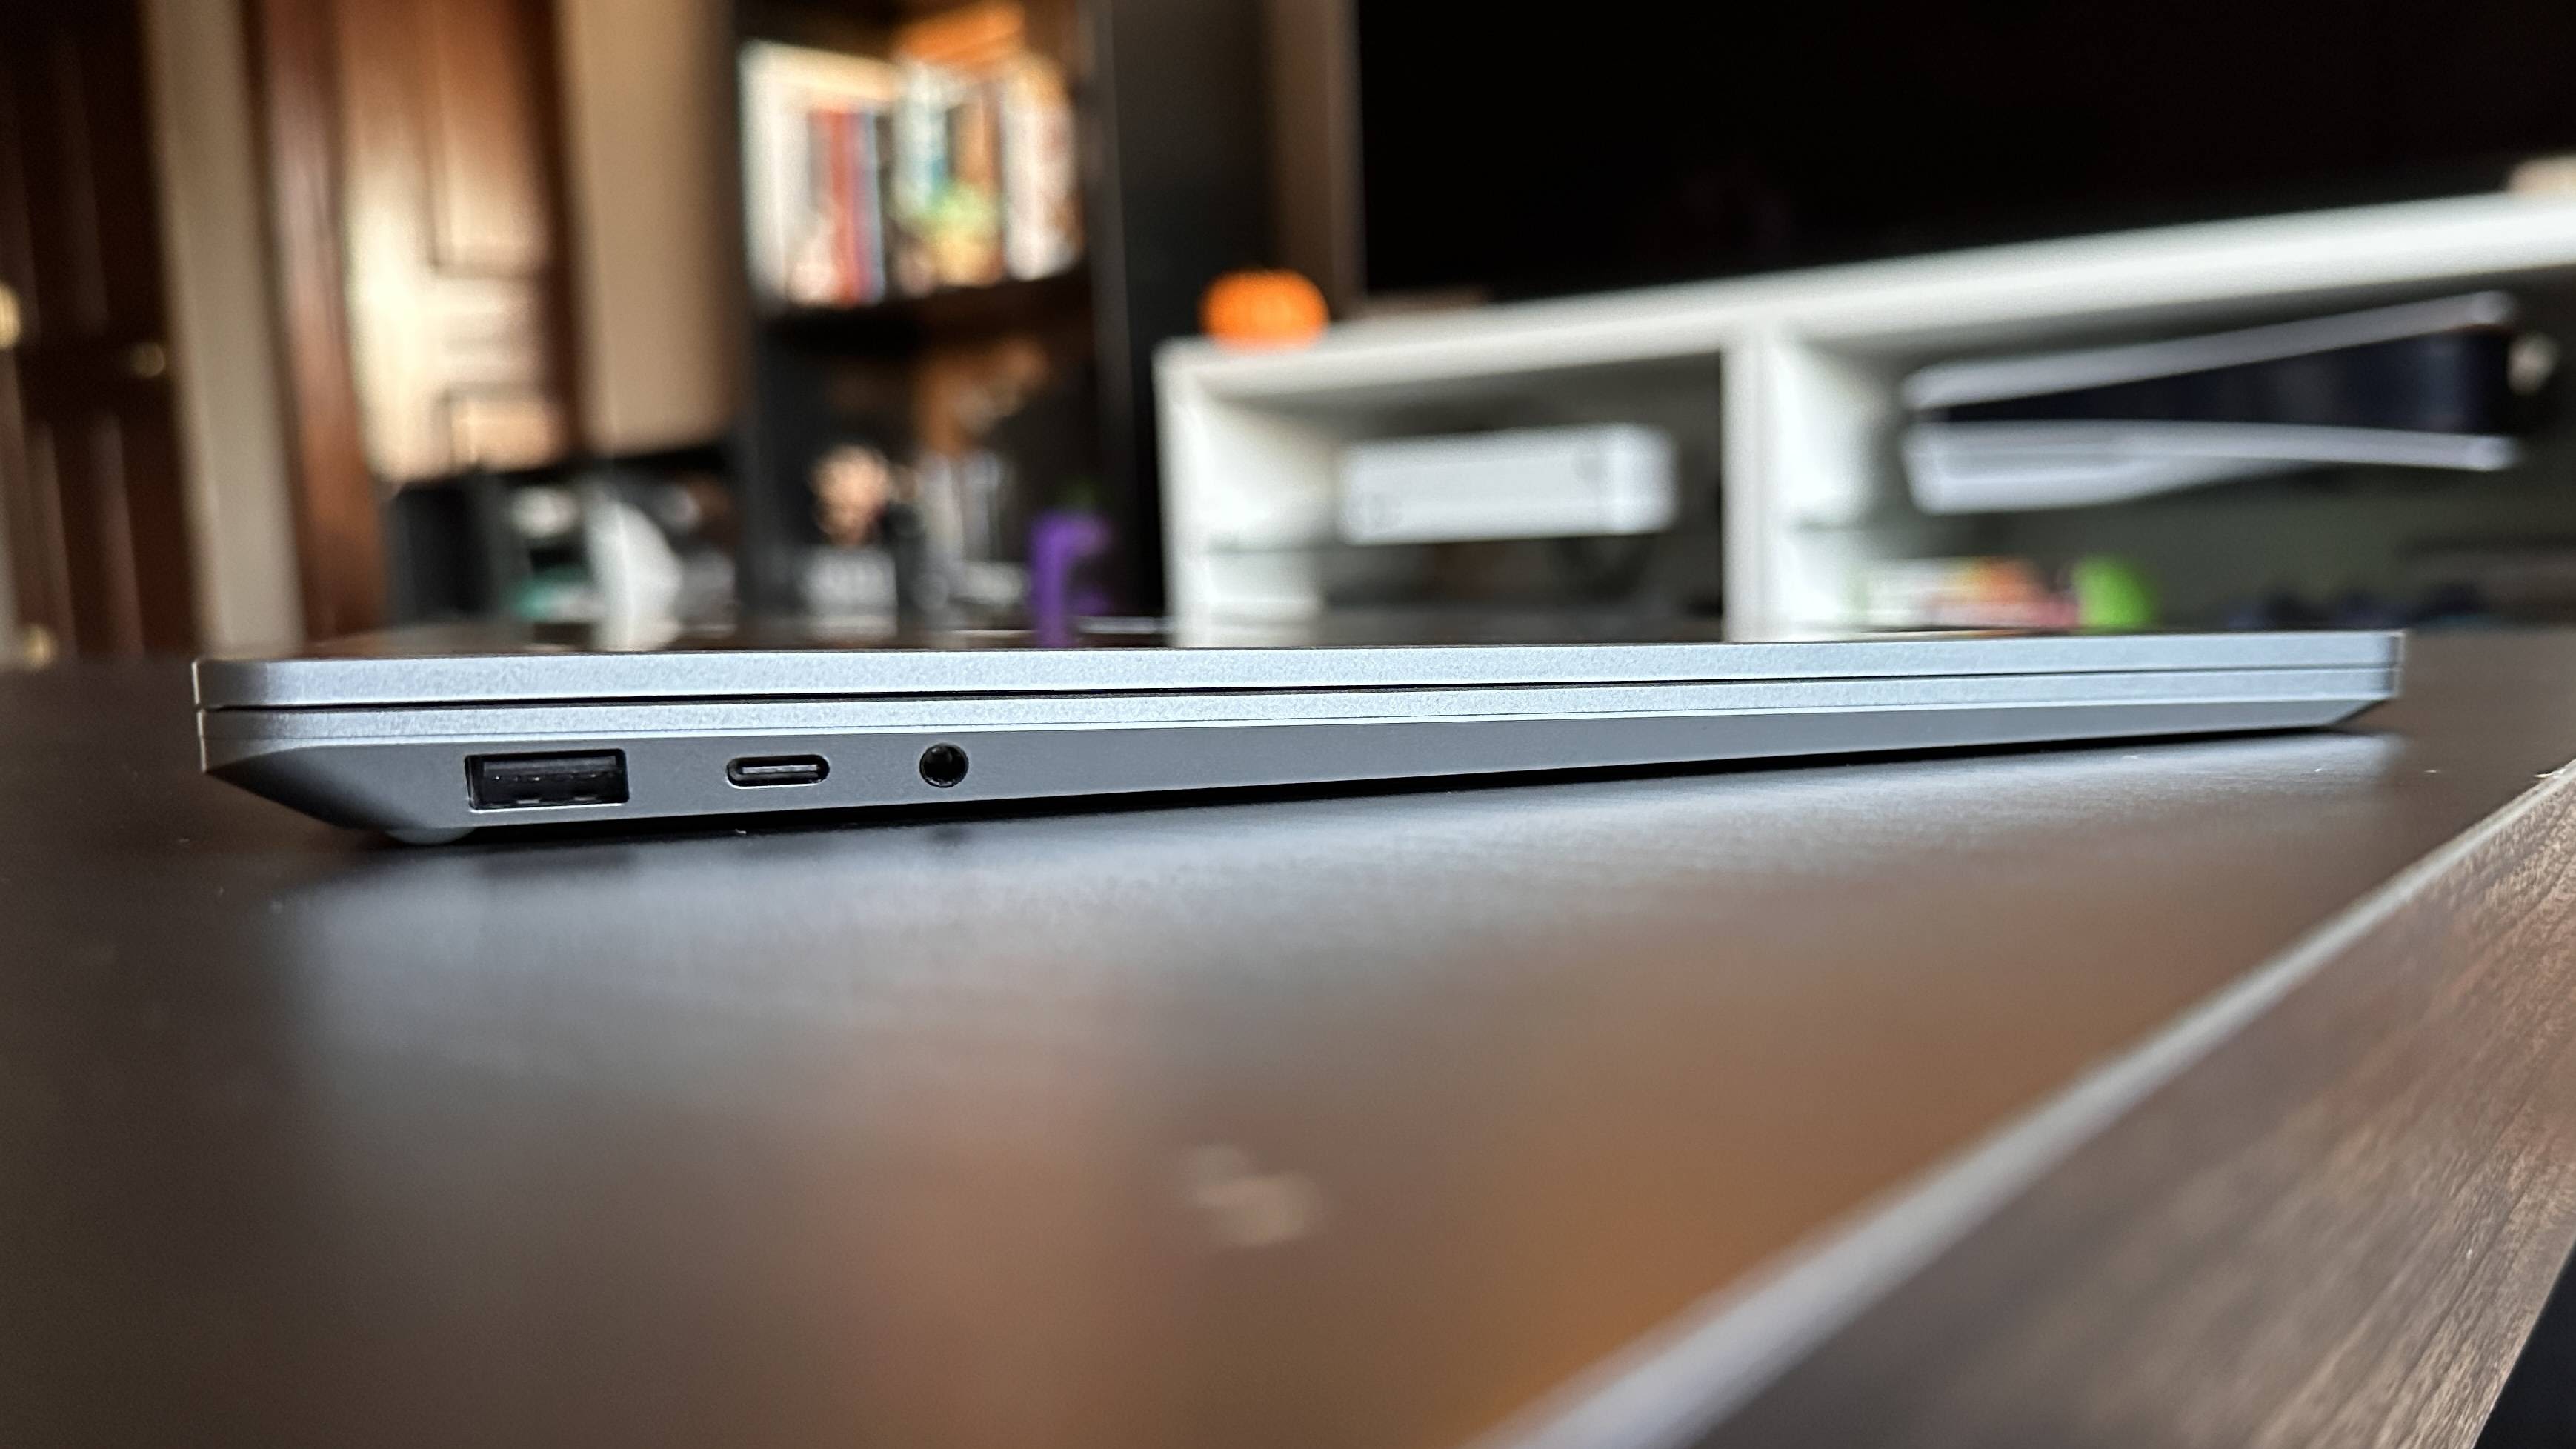 Surface Laptop 5: A Lightweight Business Laptop for Productive Work